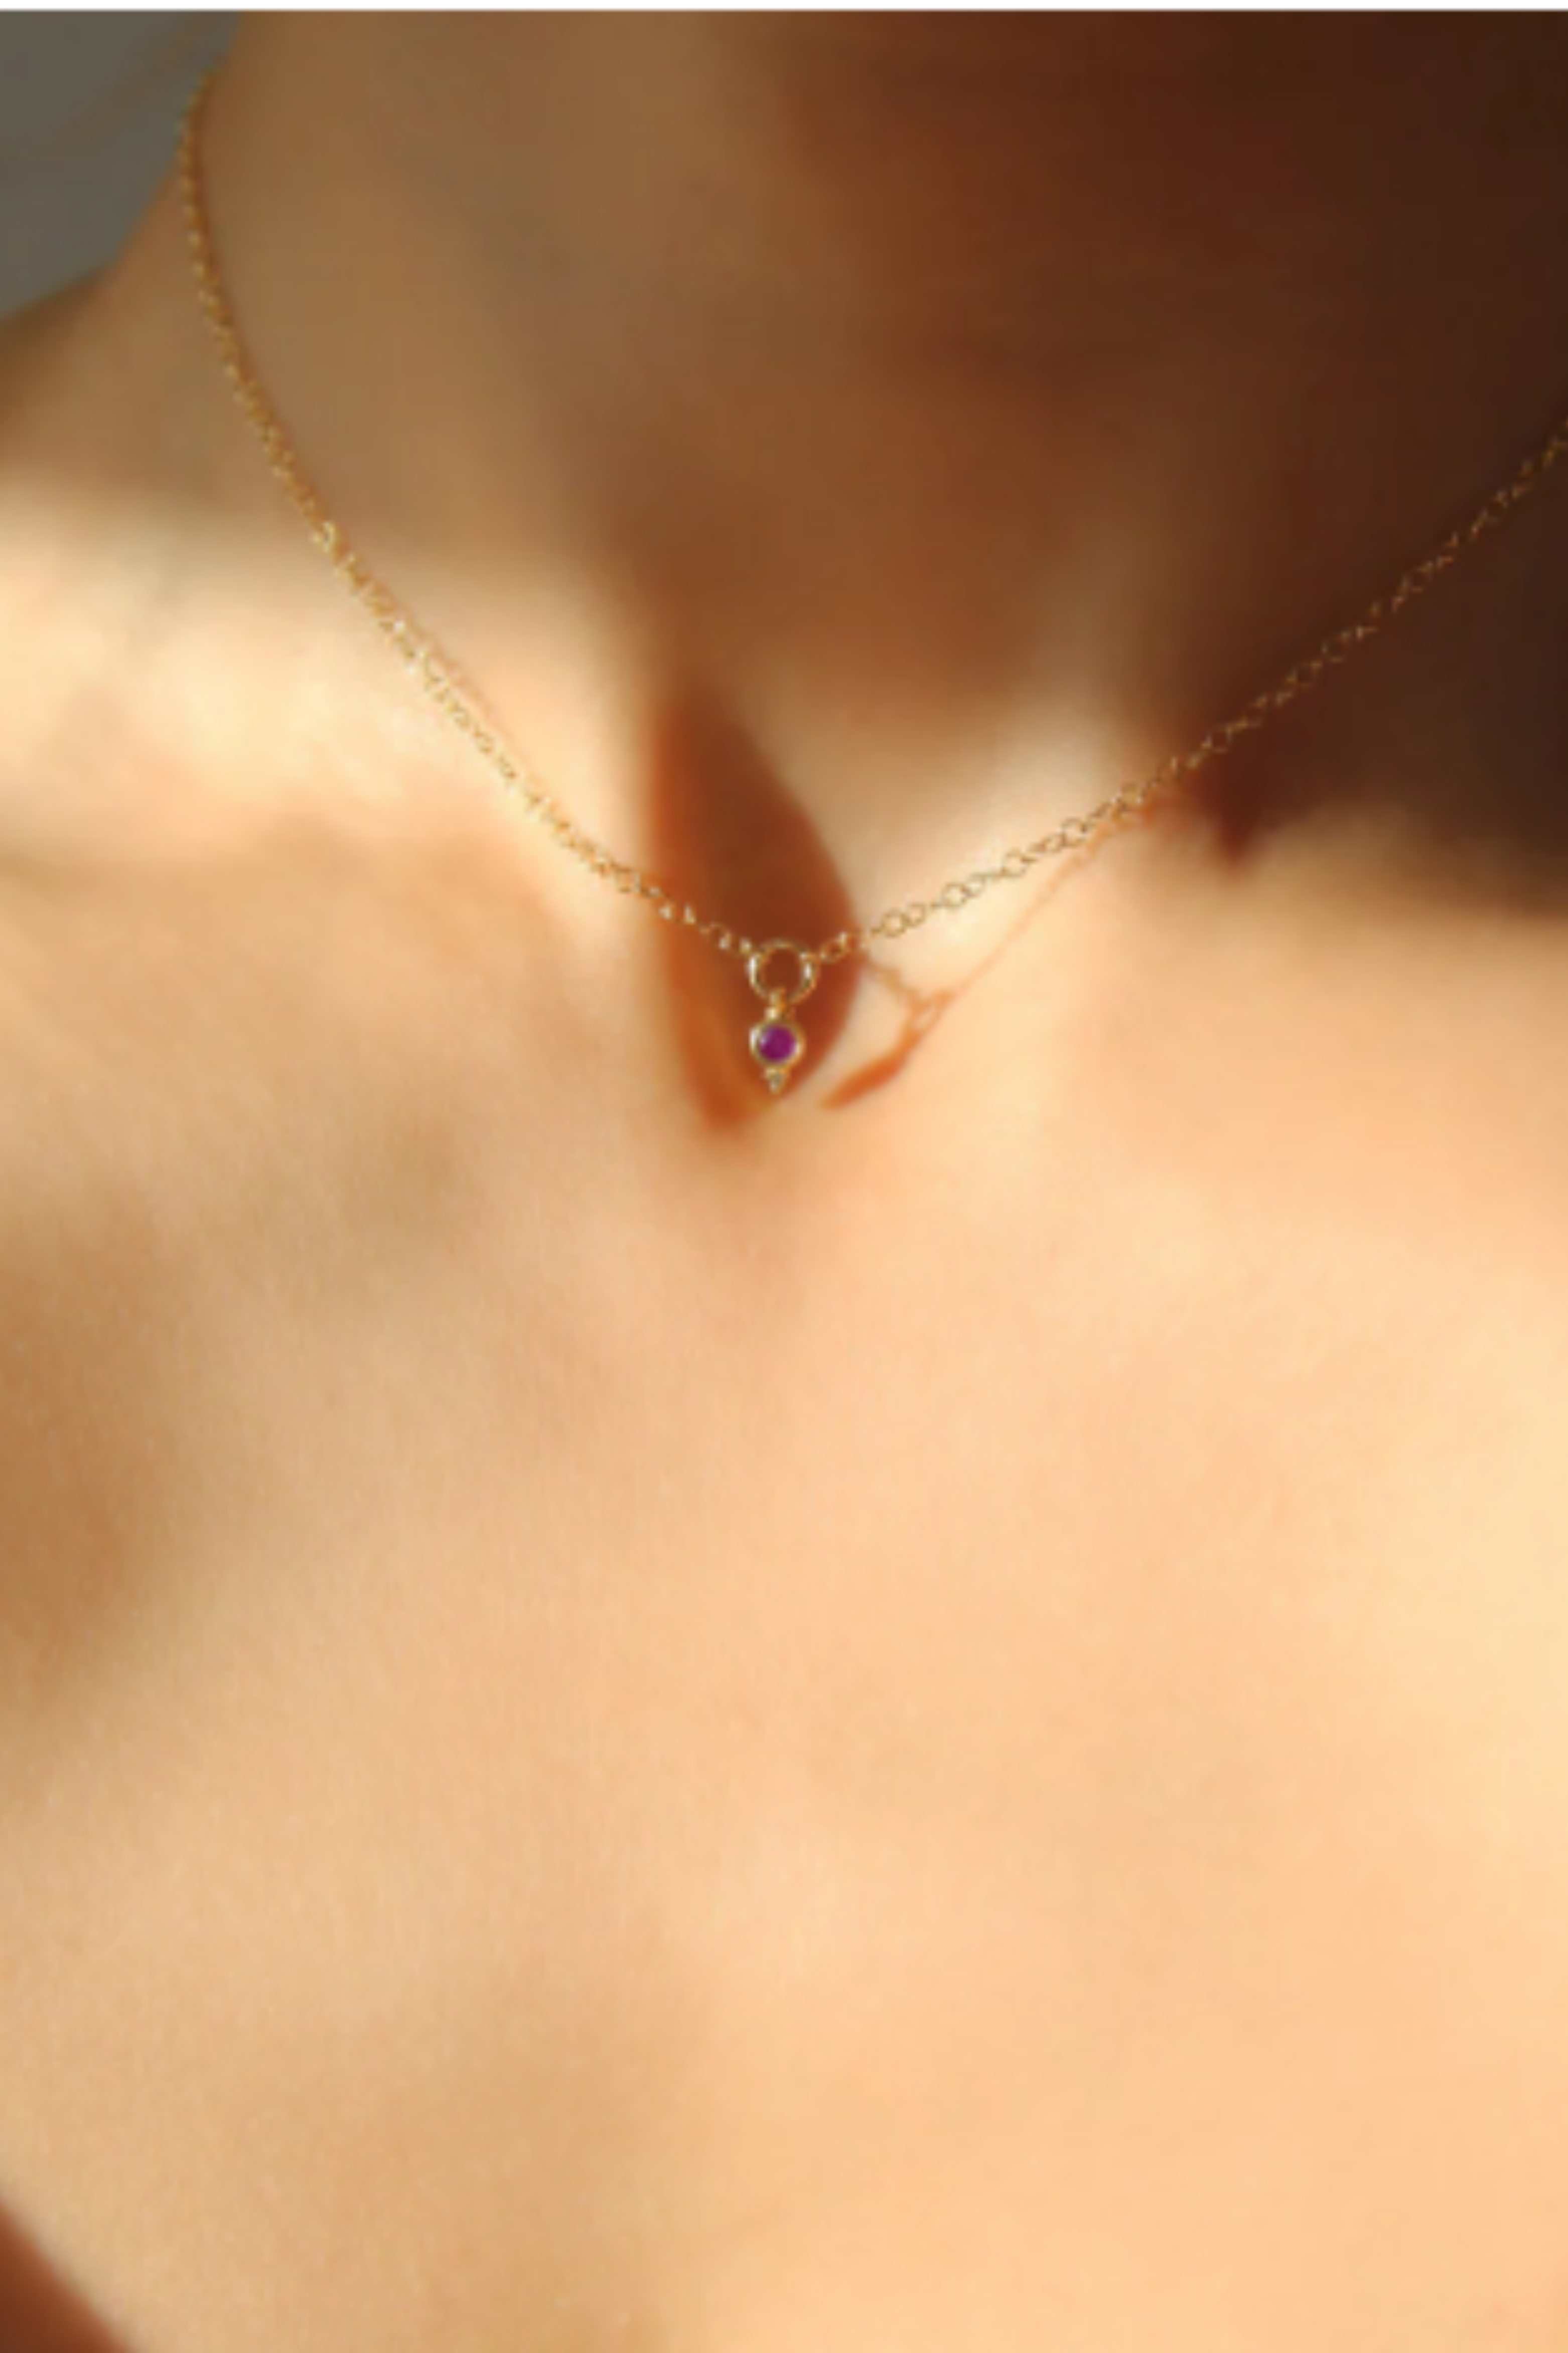 a necklace on a woman's neck